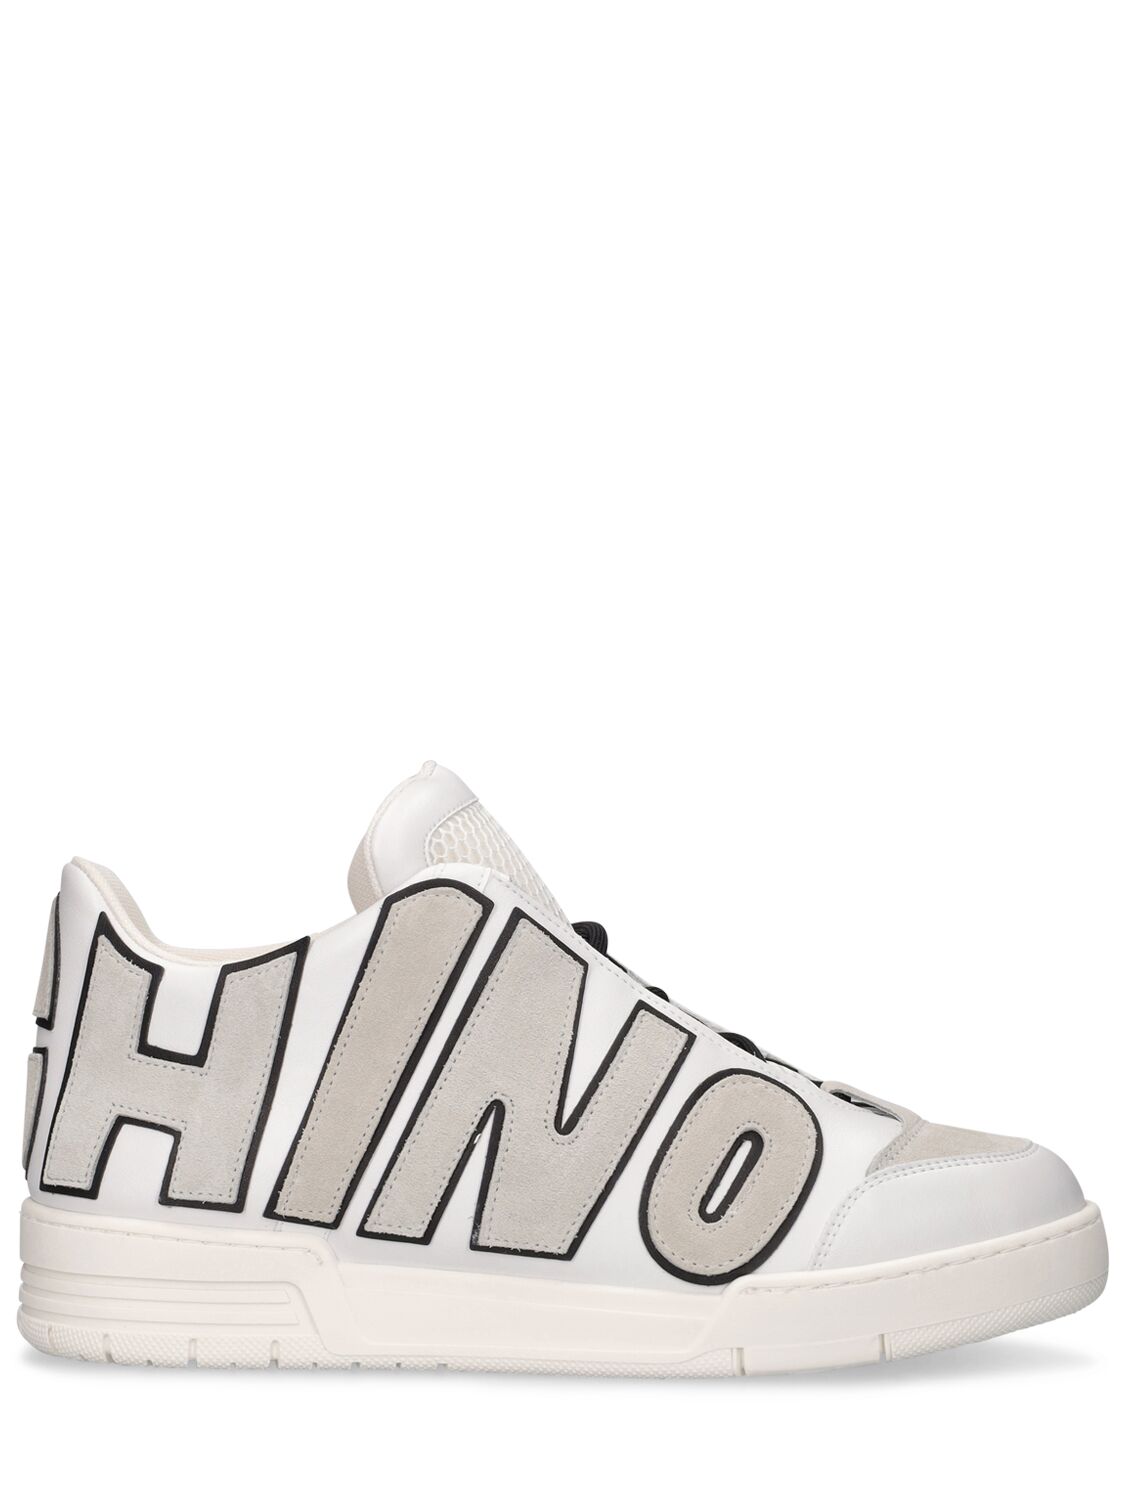 Logo Leather Mid Top Sneakers